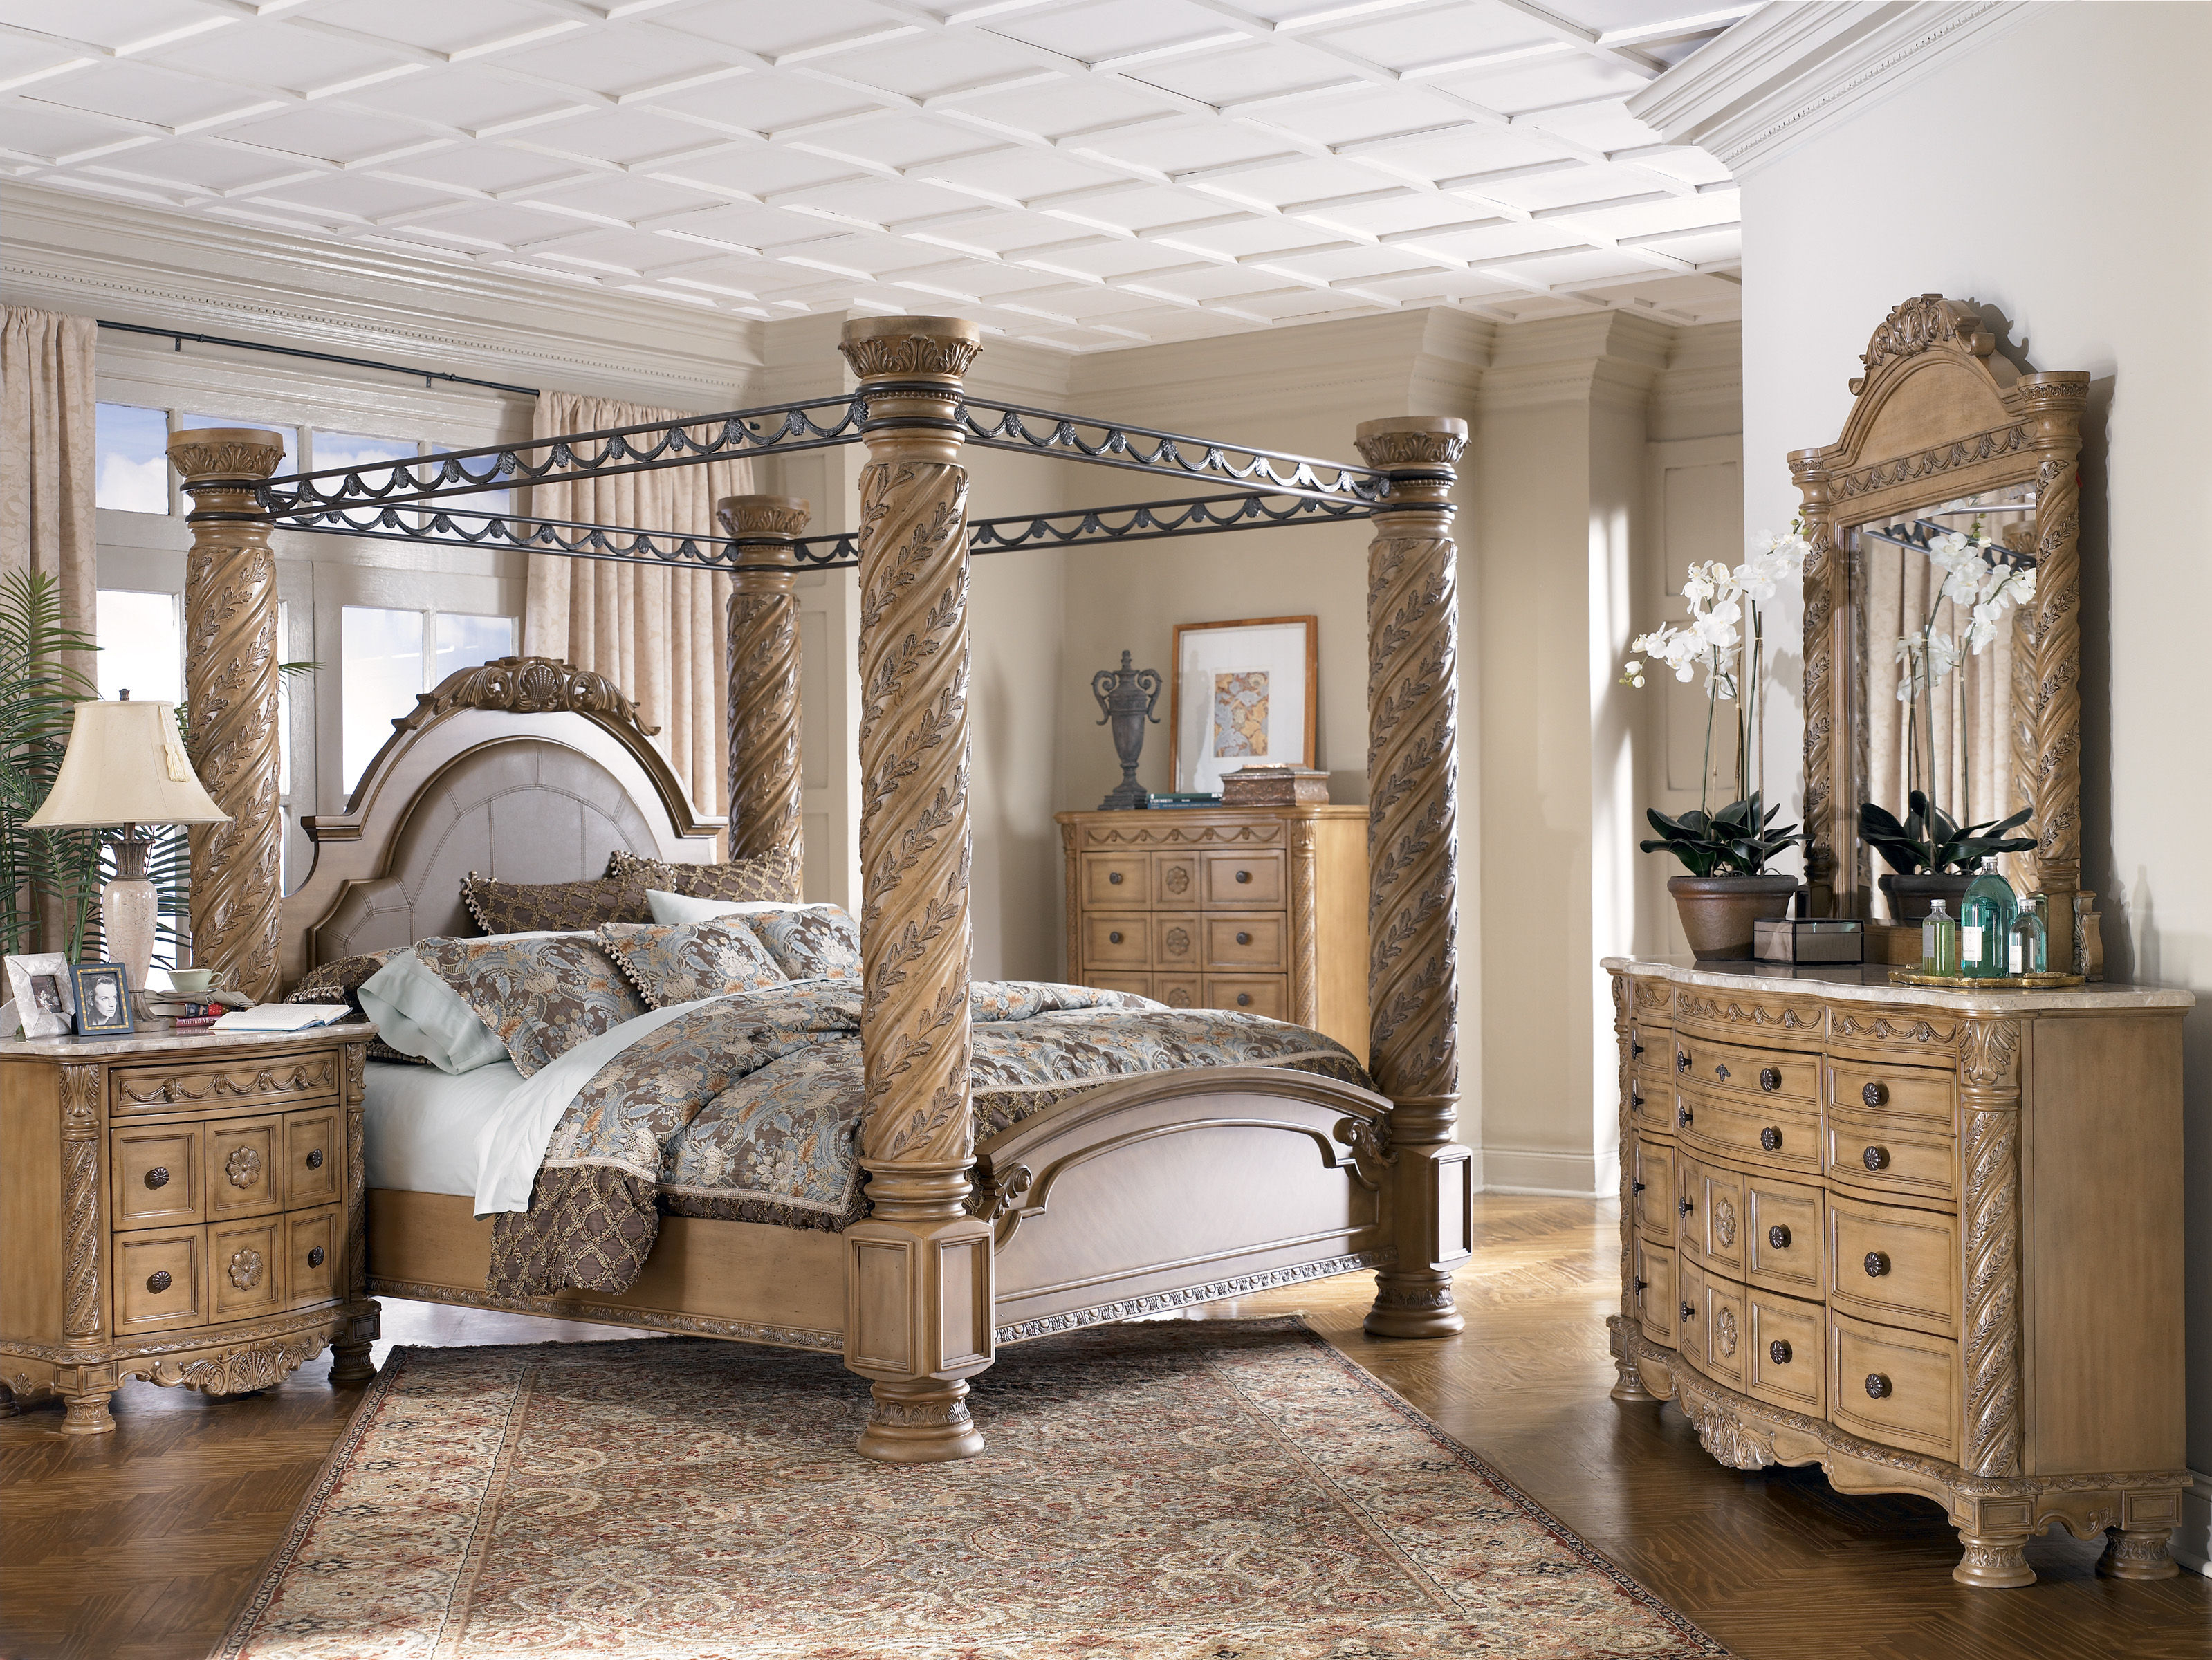 Old World 5 Pc Bedroom Set W King Poster Bed The Classy Home for dimensions 3198 X 2400